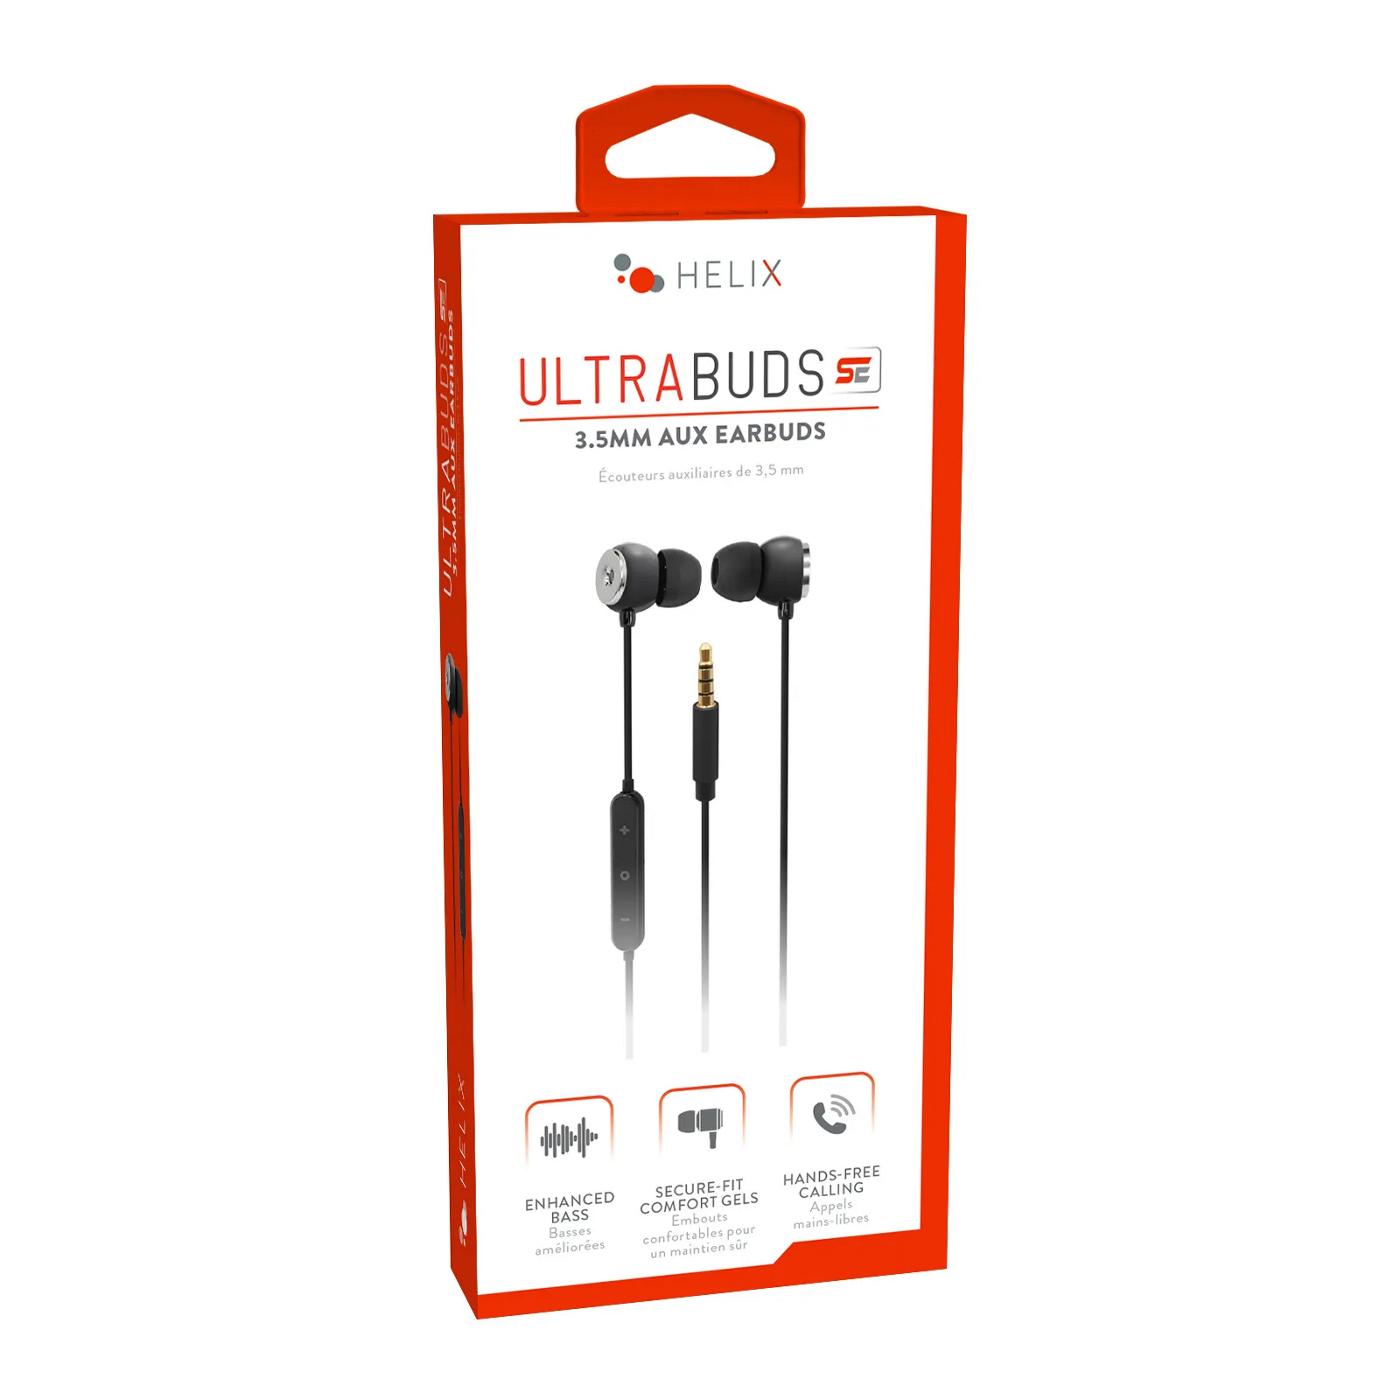 Helix Ultra 3.5mm Aux Earbuds - Black; image 1 of 2